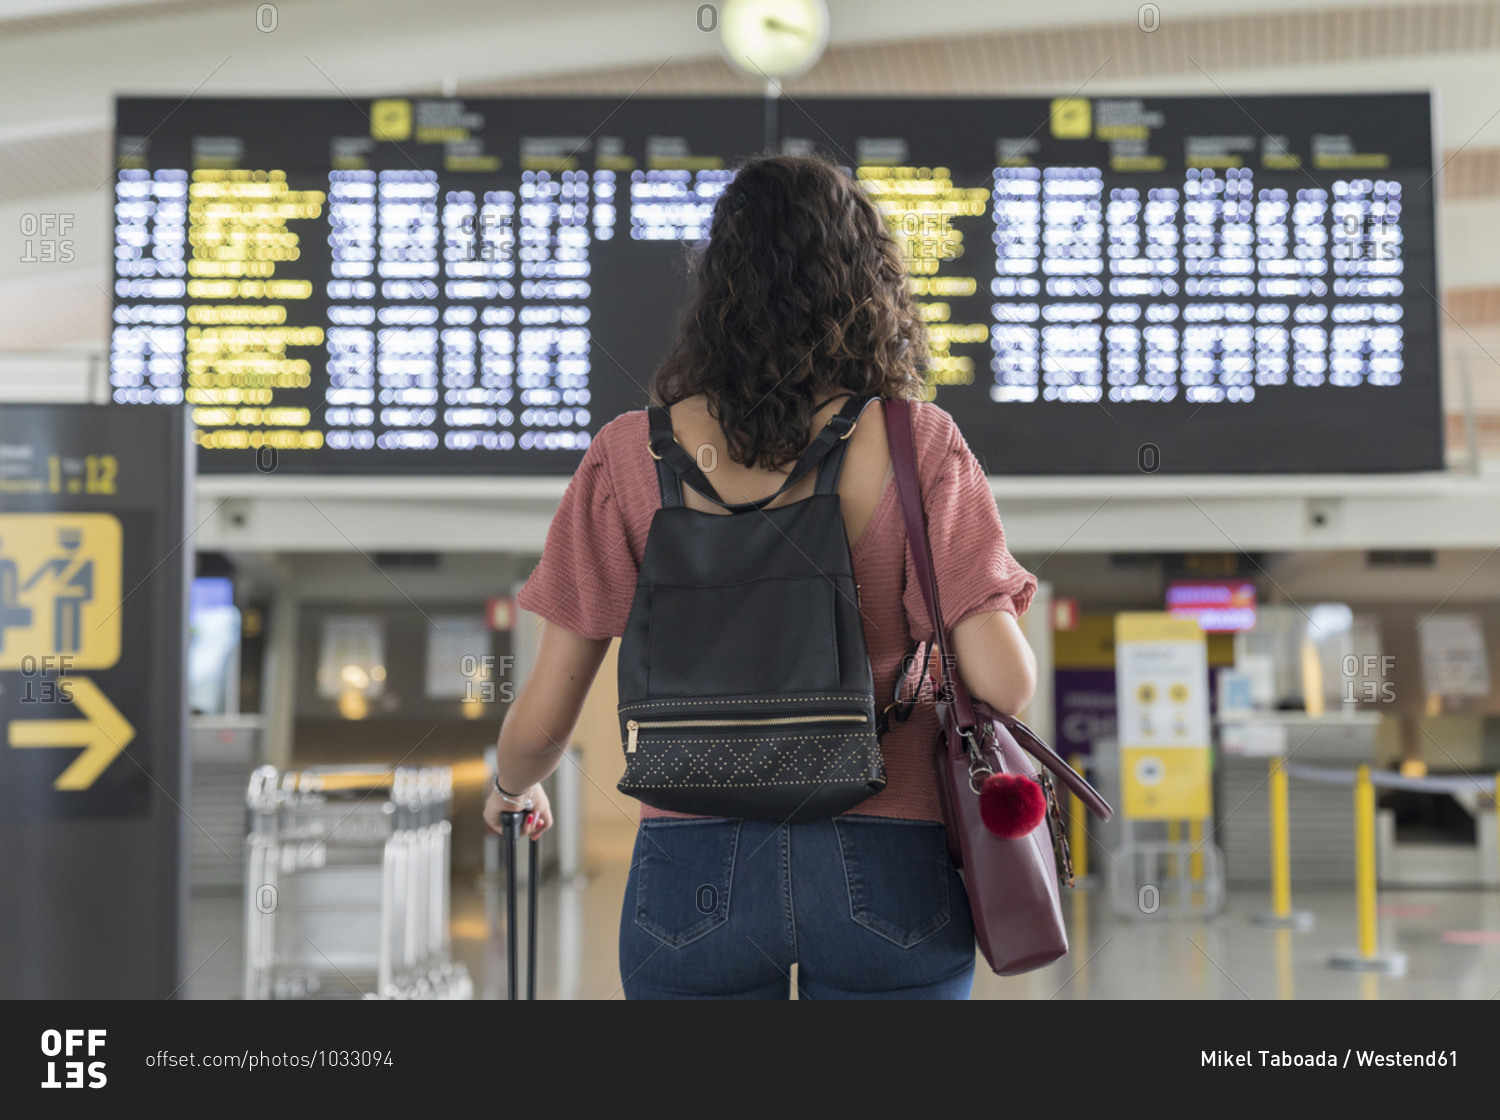 Young woman checking her flight in time board at airport